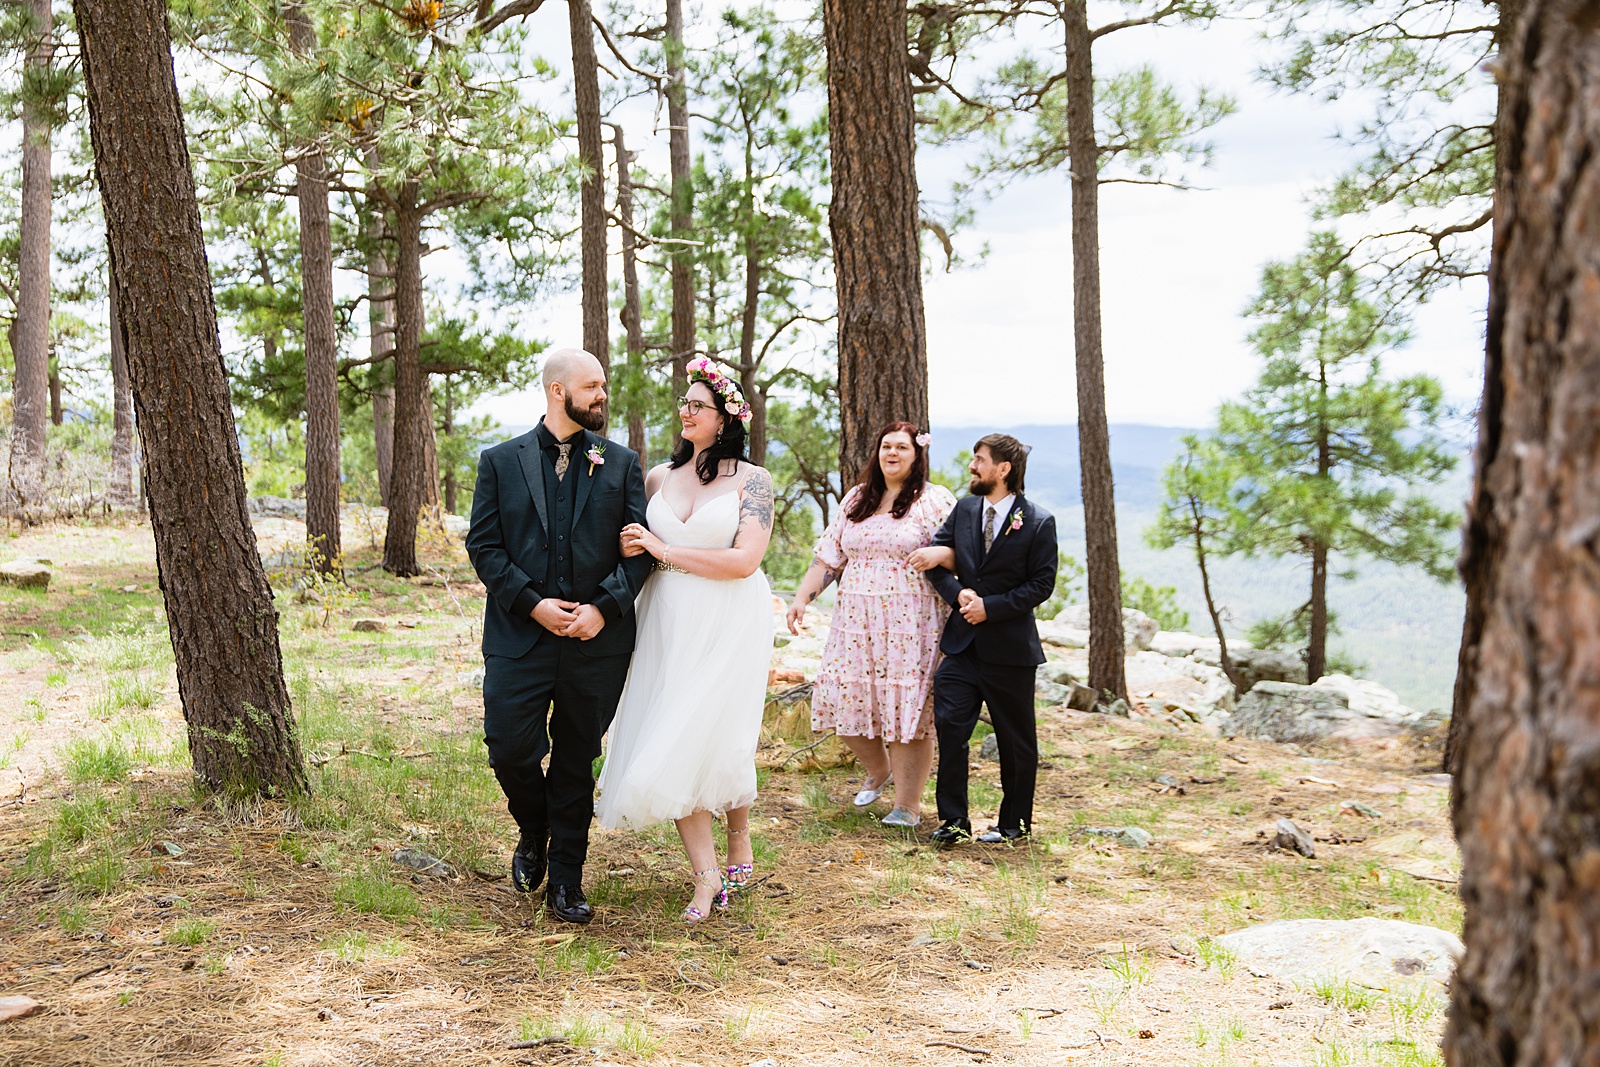 Bride & Groom walking together during their Mogollon Rim elopement by Arizona elopement photographer PMA Photography.